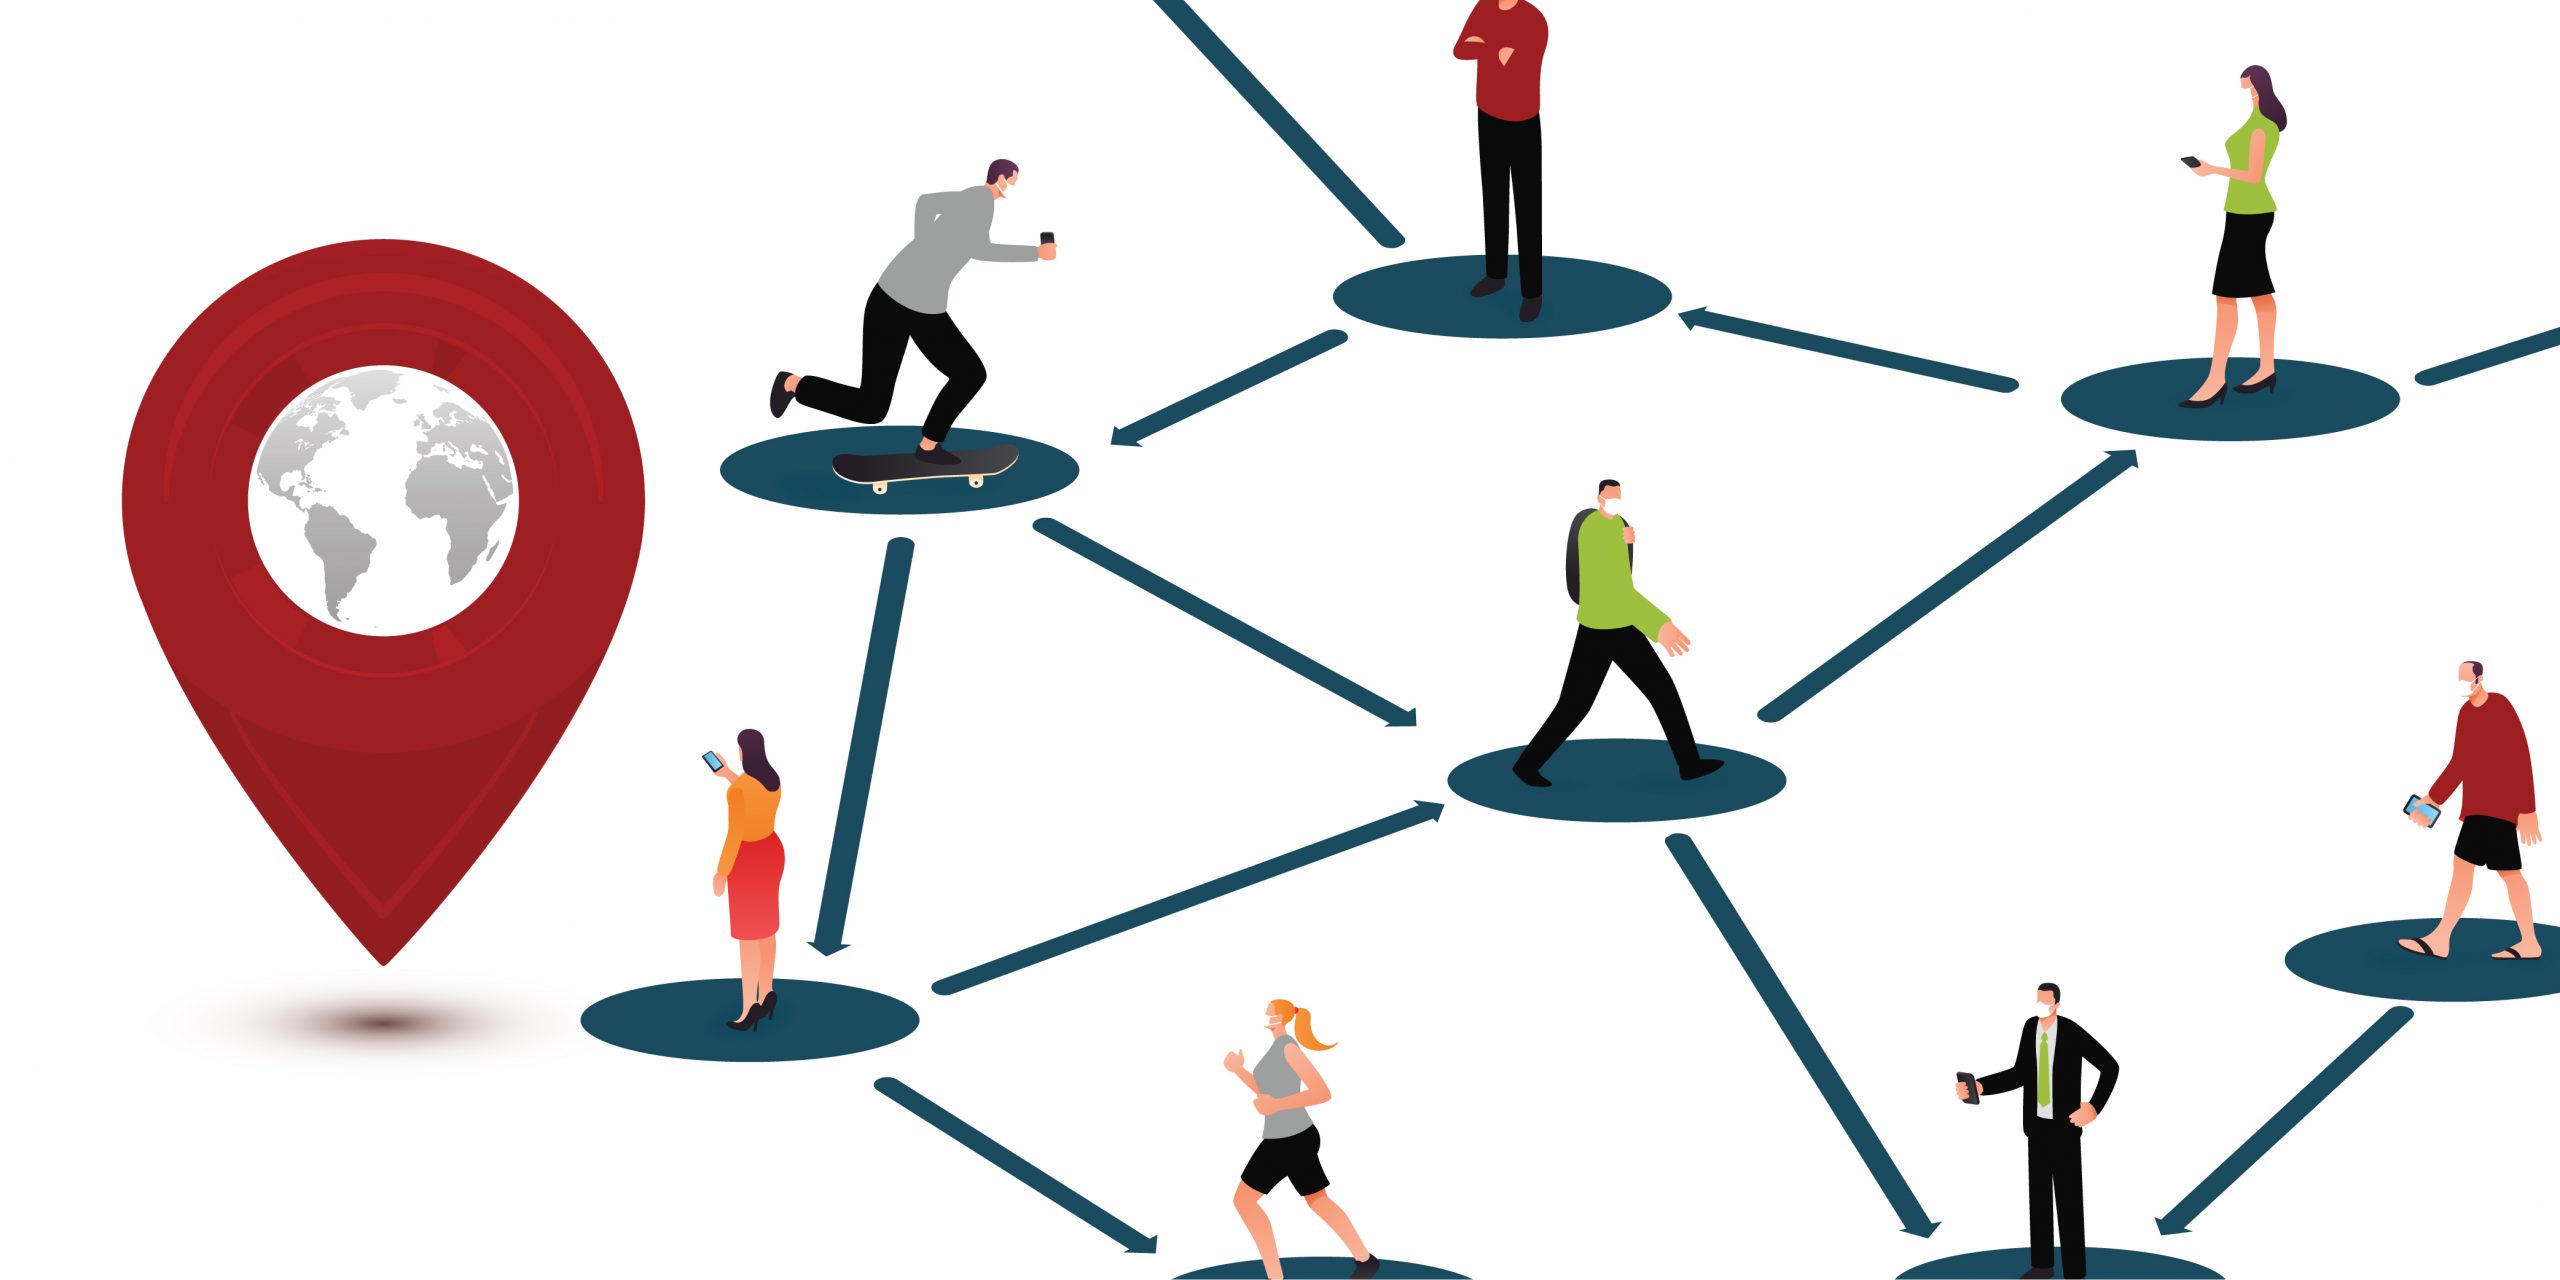 Tracking customer inter-relationships can be a competitive advantage